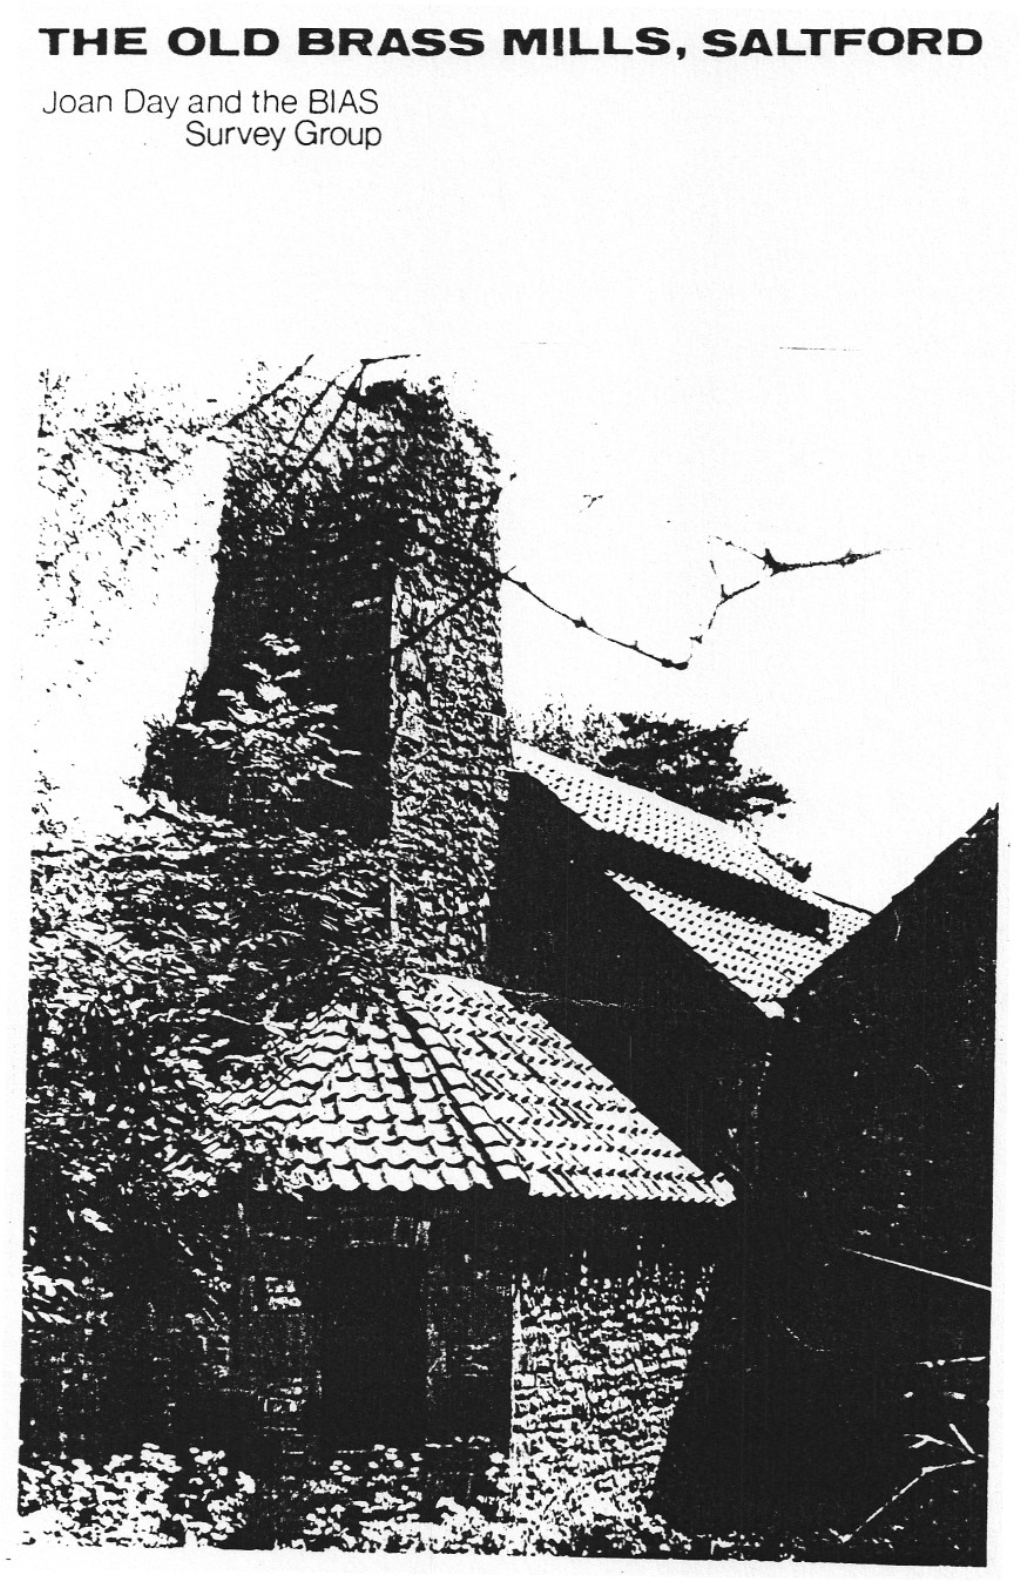 THE OLD BRASS MILLS, SALTFORD Joan Day and the BIAS Survey Group